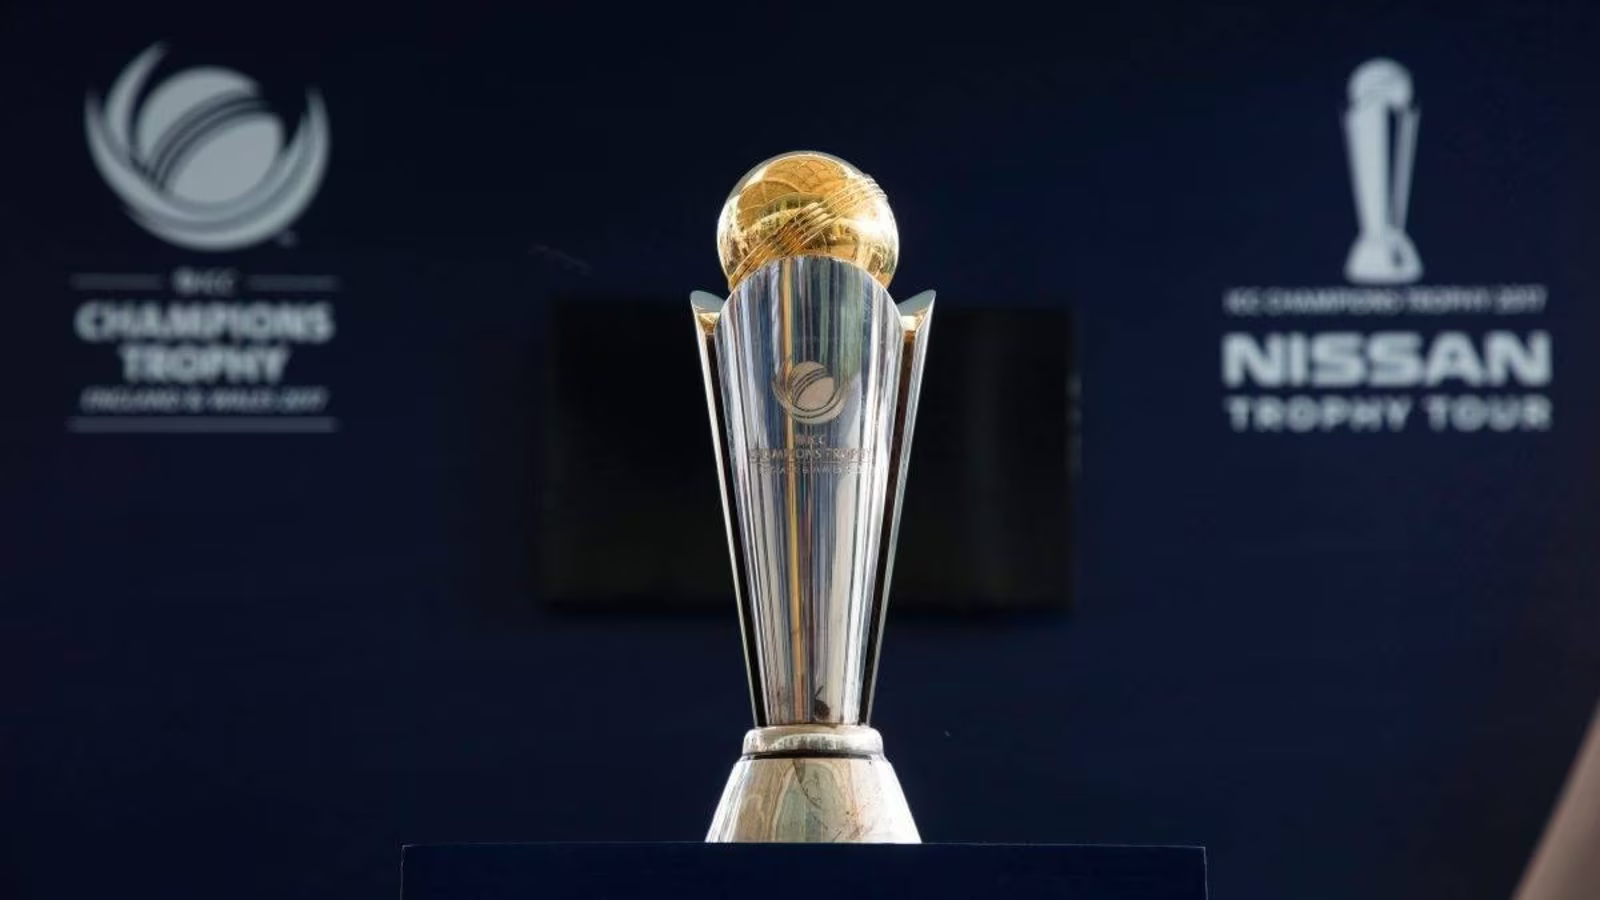 Pakistan will host Champions Trophy in February 2025 | X